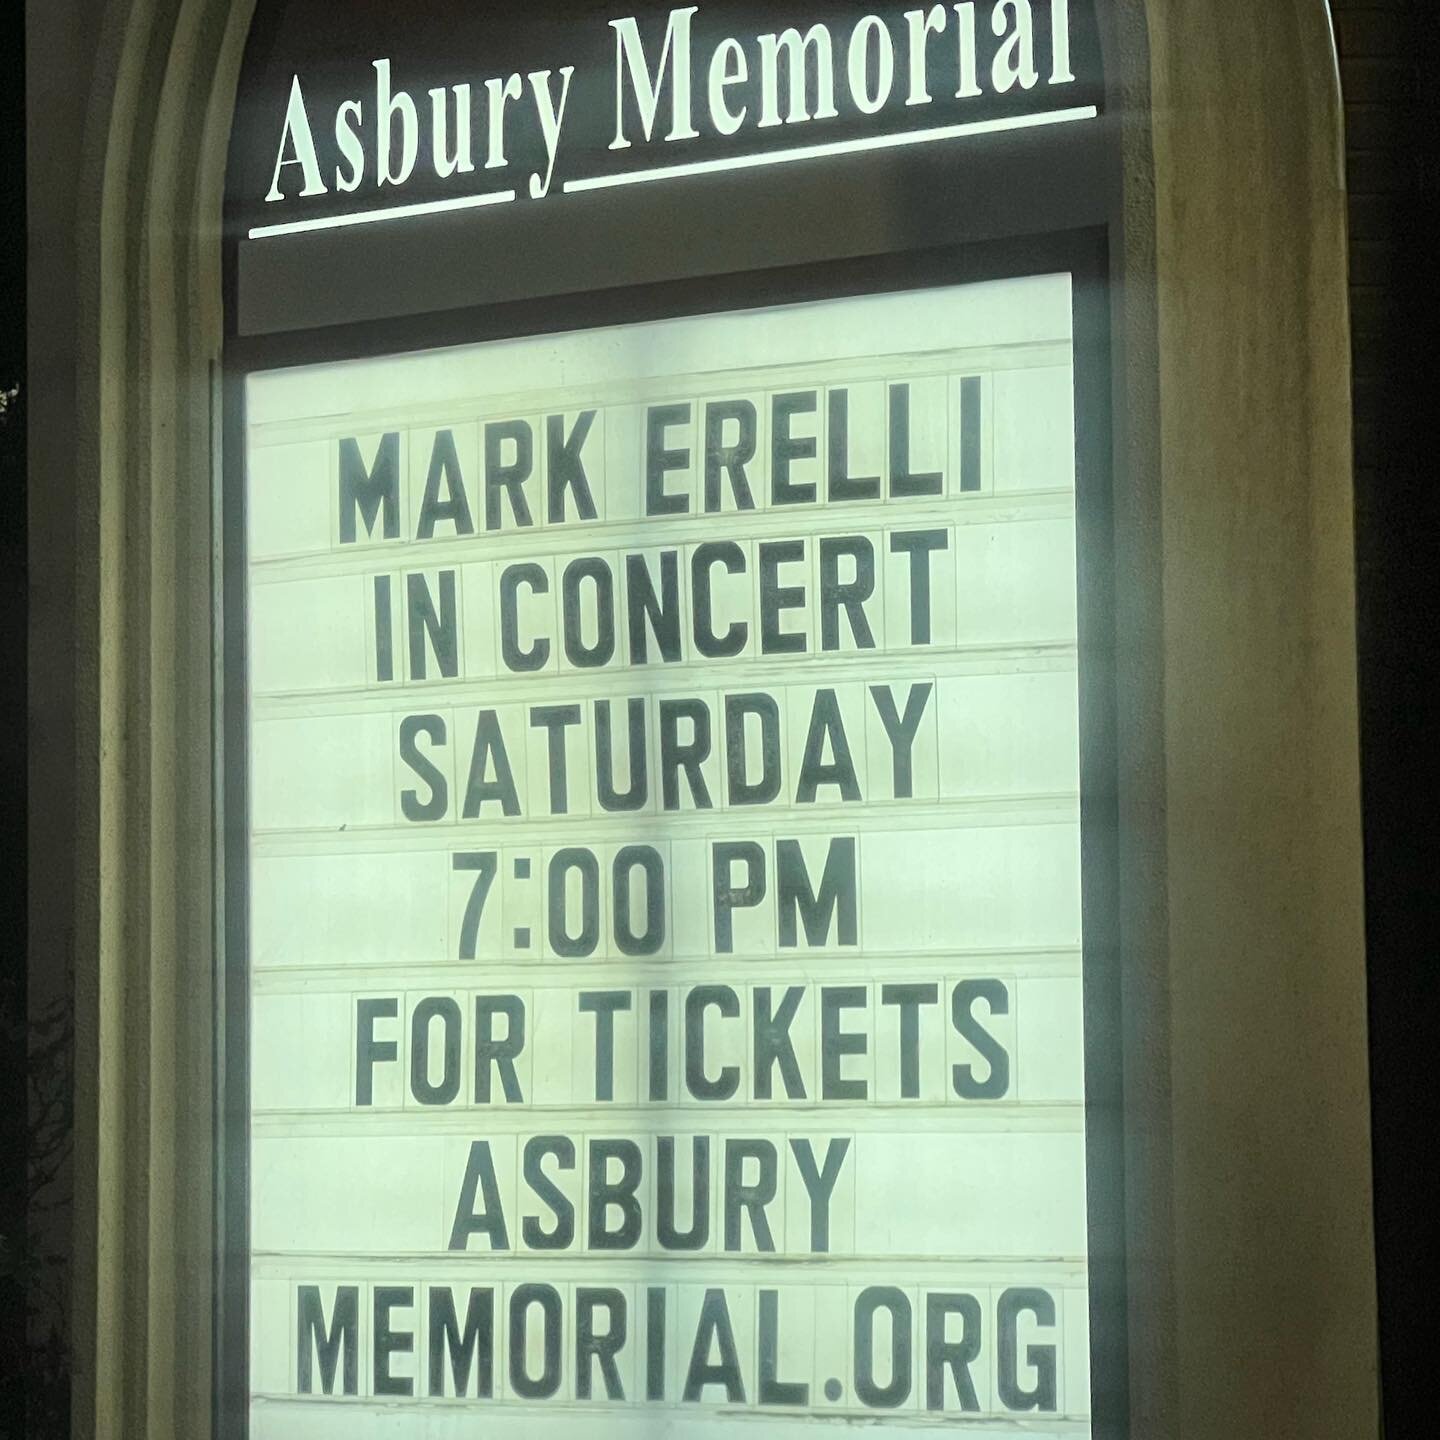 Good times in Georgia last night in a sonically dreamy sanctuary. What an open, welcoming community @asburymemorialchurchsav is building down there. Thanks for having me!